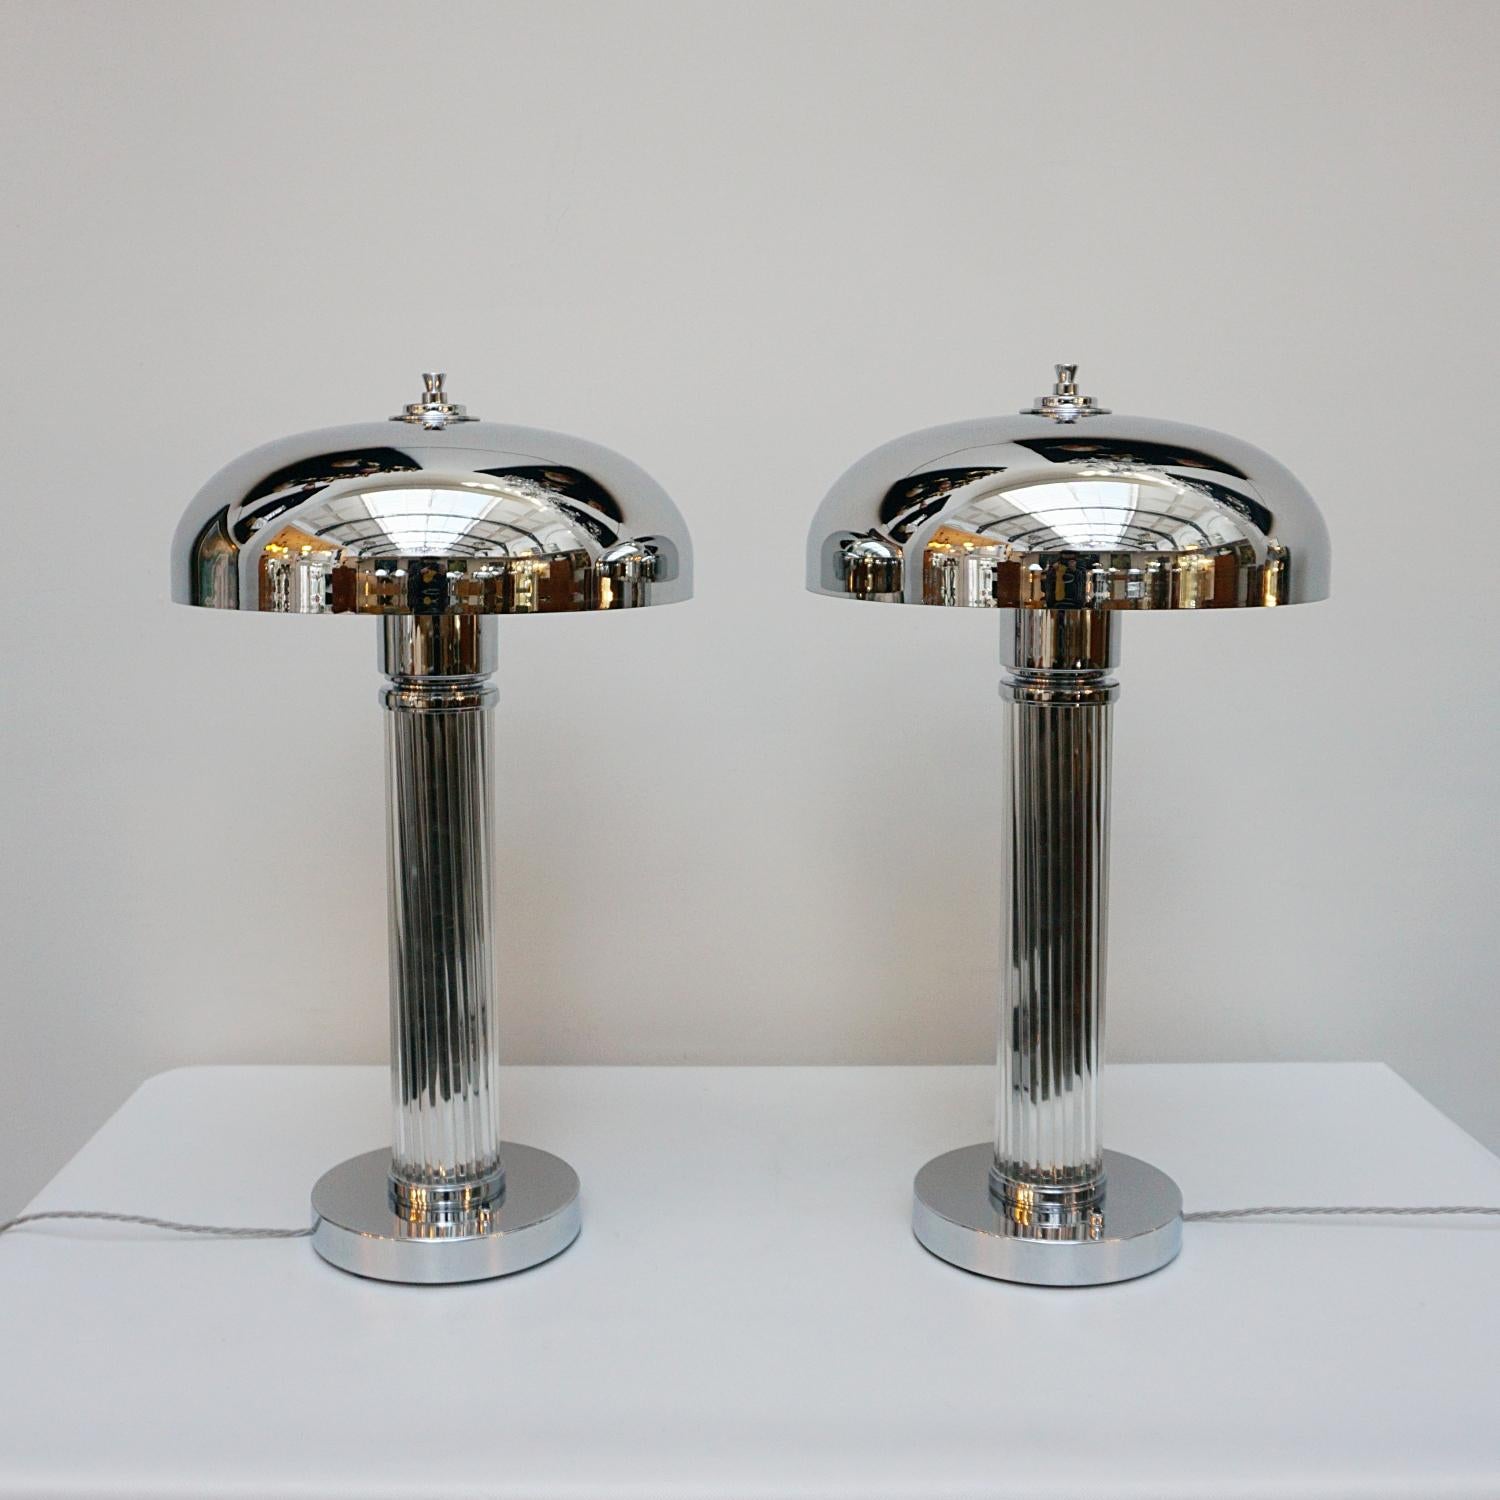 A pair of tall Art Deco style dome lamps. Glass rod stem over a chromed metal circular base and a chromed metal shade. Chrome finial to top. 

Dimensions: H 65cm W 20cm

Origin: English

Item Number: J302

All of our lighting is fully refurbished,